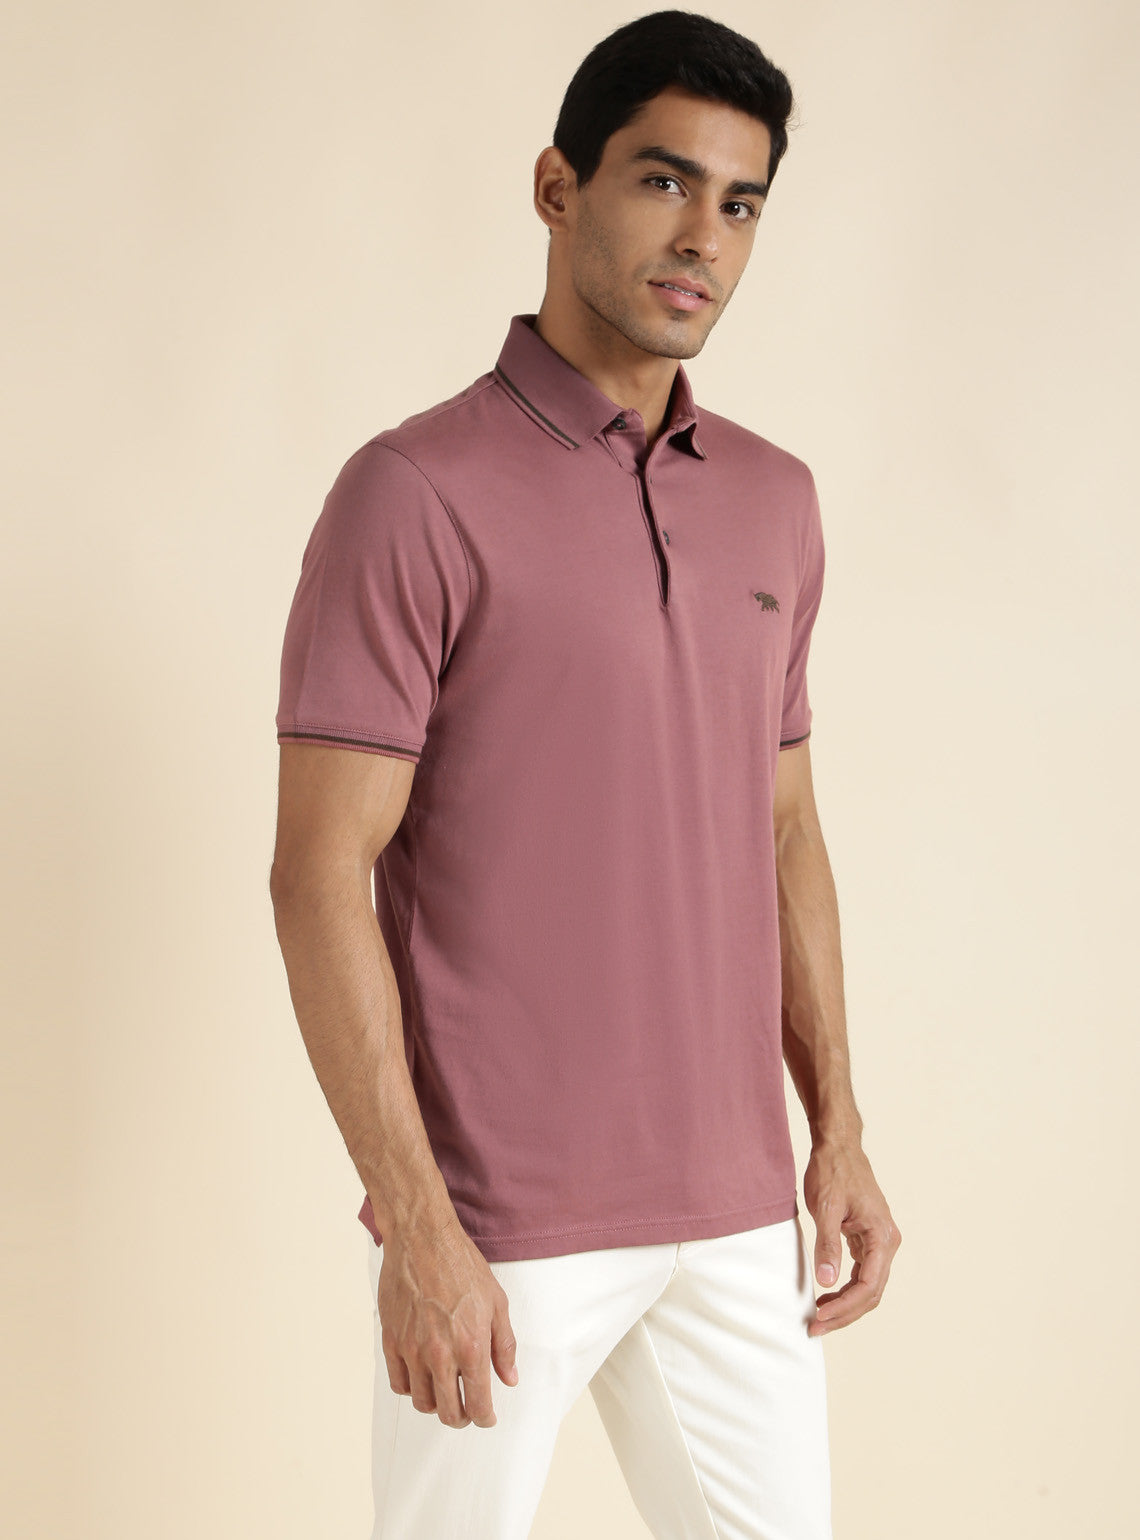 Rosewood Pink Polo